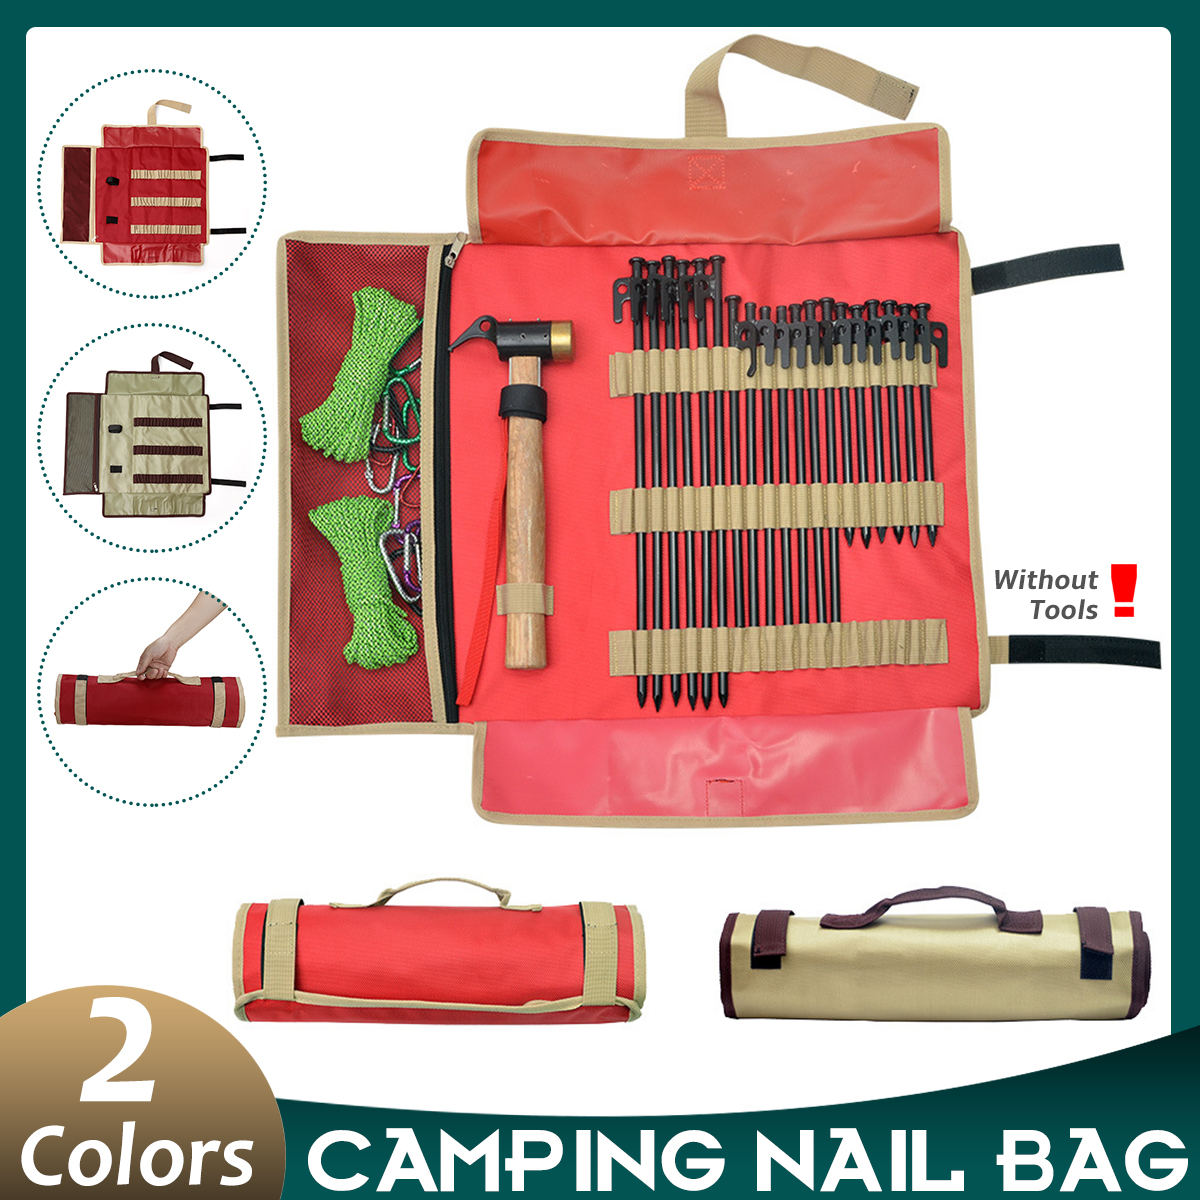 Red-Portable-Outdoor-Camping-Nail-Work-Tool-Bag-Storage-Pocket-Poucch-Handbag-Tool-Bags-1750945-3